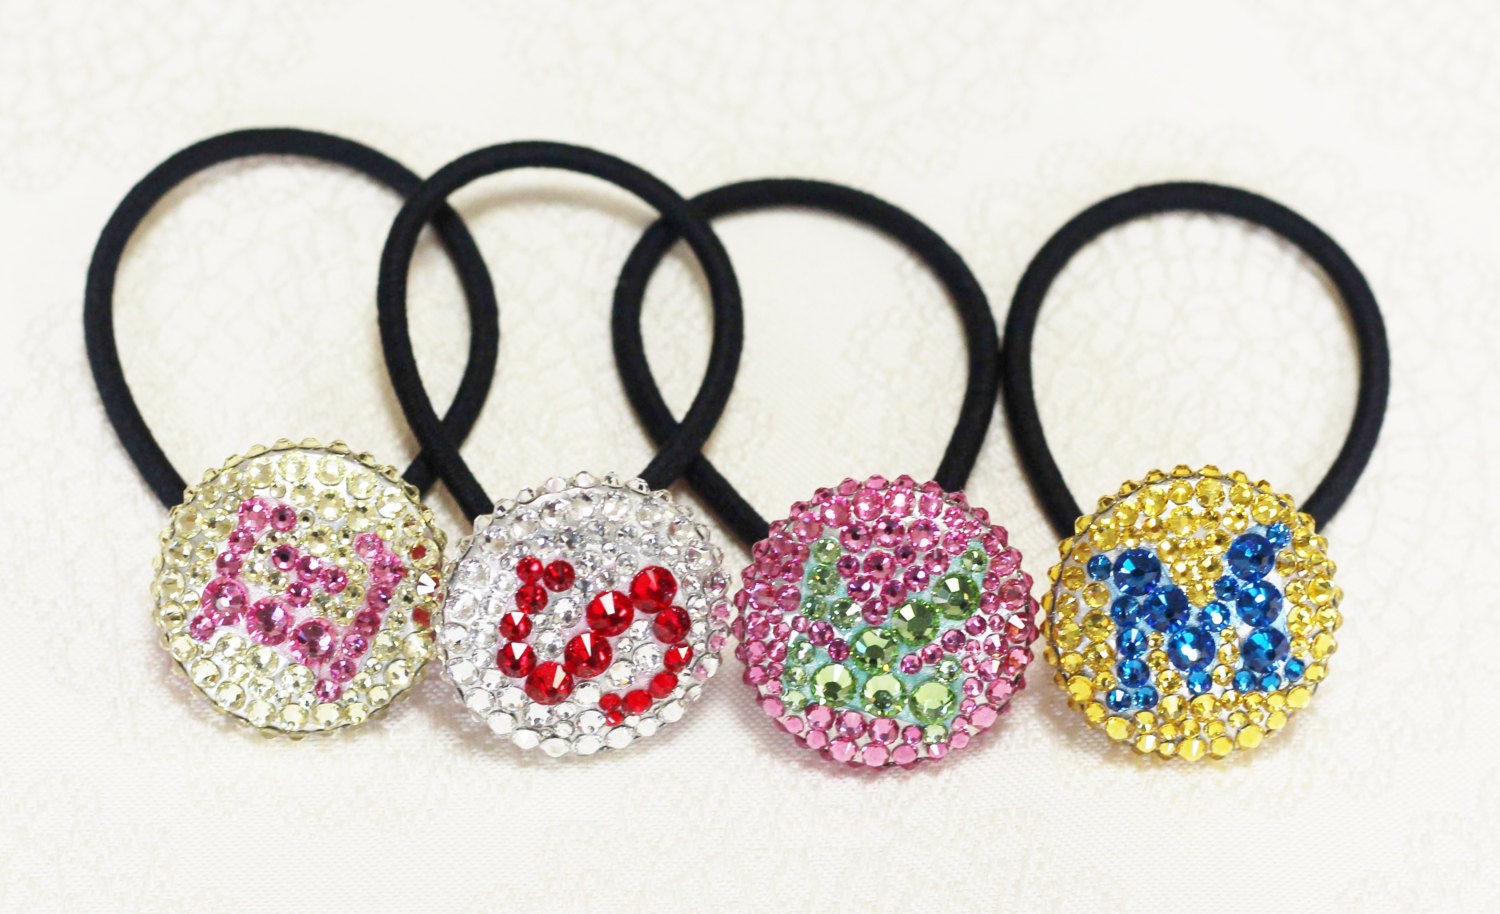 4pcs Ladies' Colorful Mesh, Crystal, Cube, Ball Style Hair Ties For Daily  Hairstyling